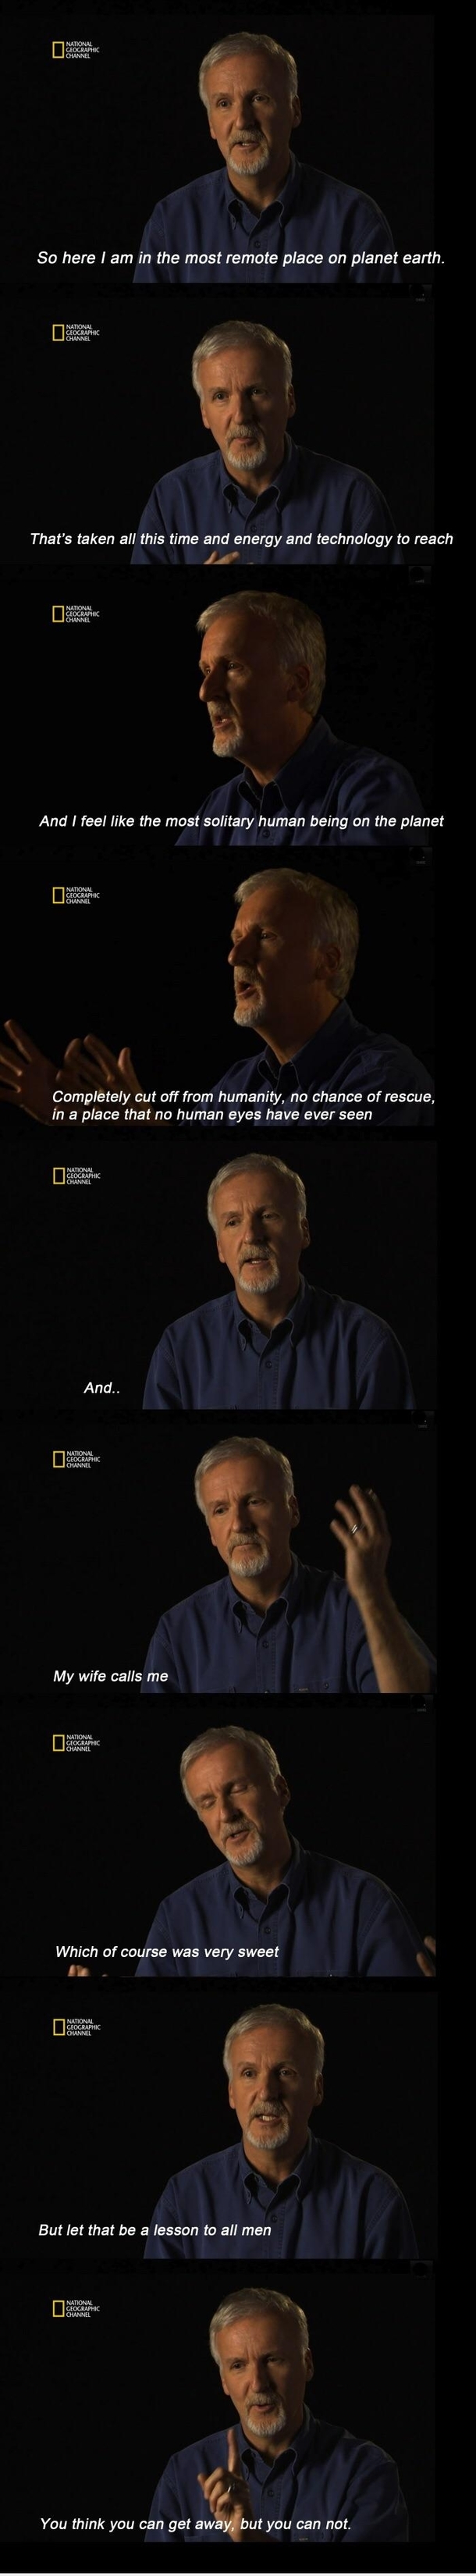 James Cameron with an important lesson for life